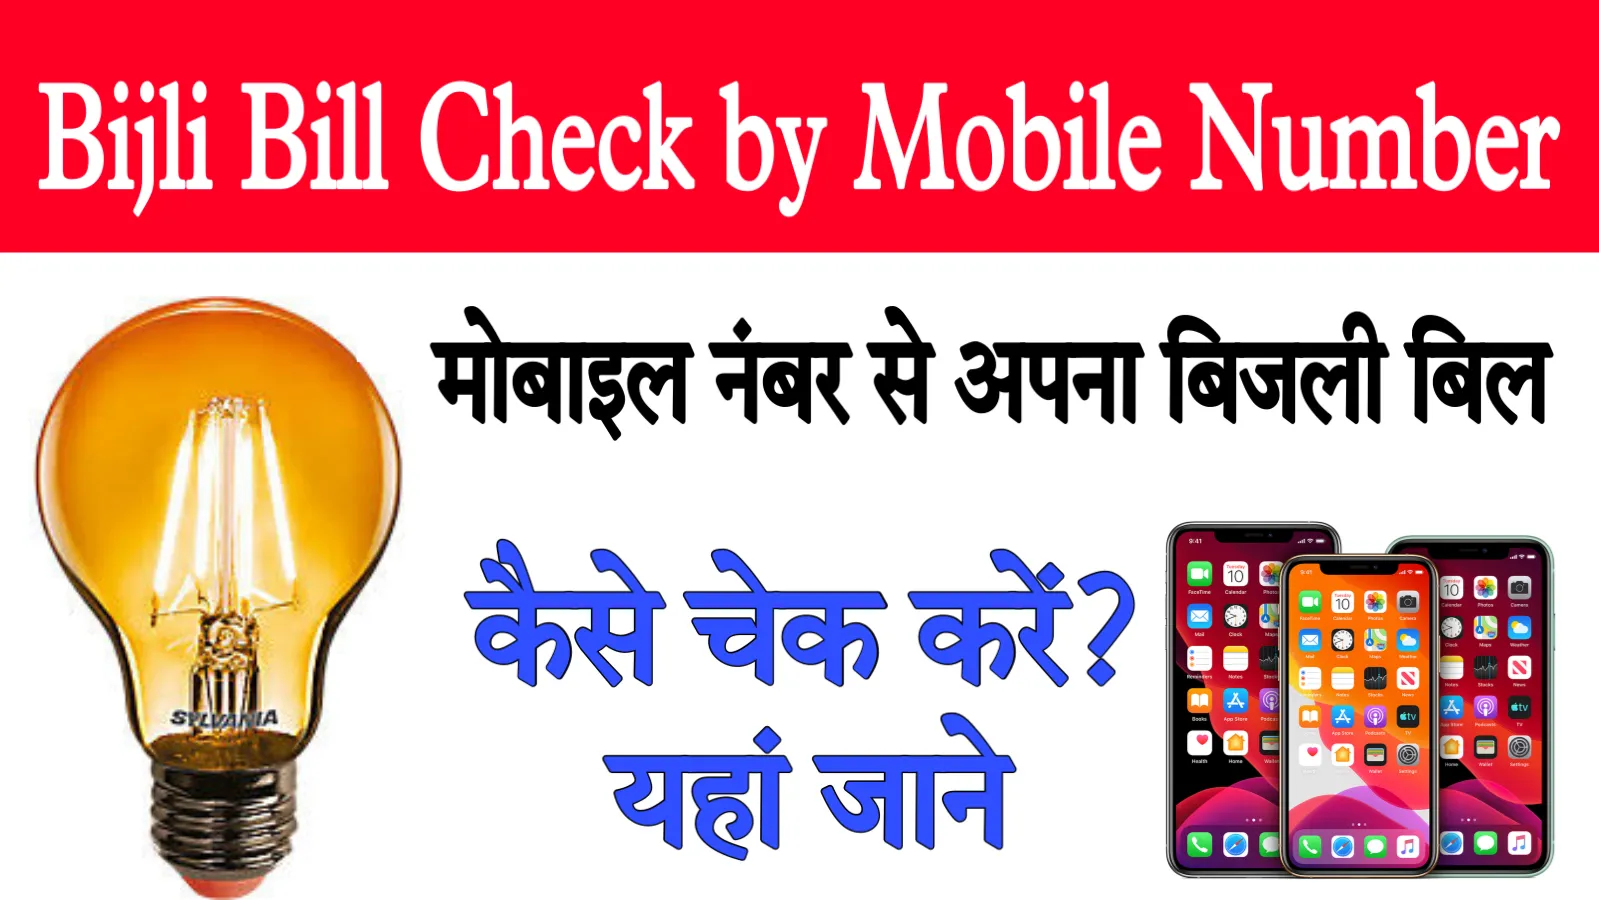 Bijli Bill Check by Mobile Number